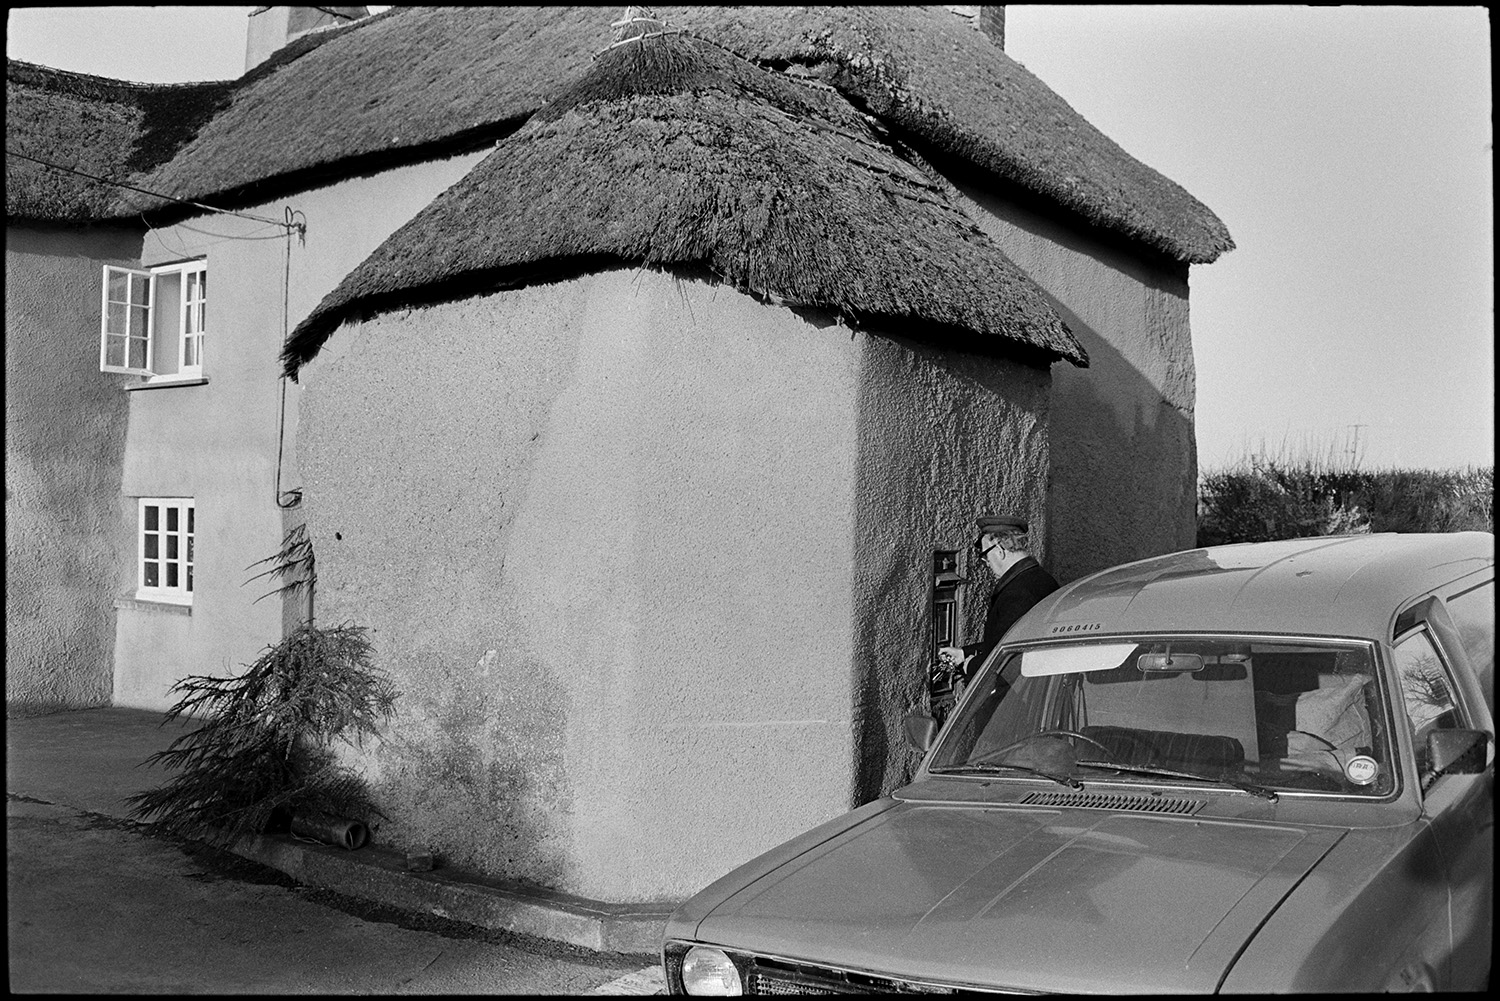 Postman emptying letterbox post, van parked, thatched cottage. 
[A postman locking a post box after collecting the letters inside, at Moor End, Burrington. The post box is set into the wall of a cob and thatch cottage. His post van is parked behind him on the road.]